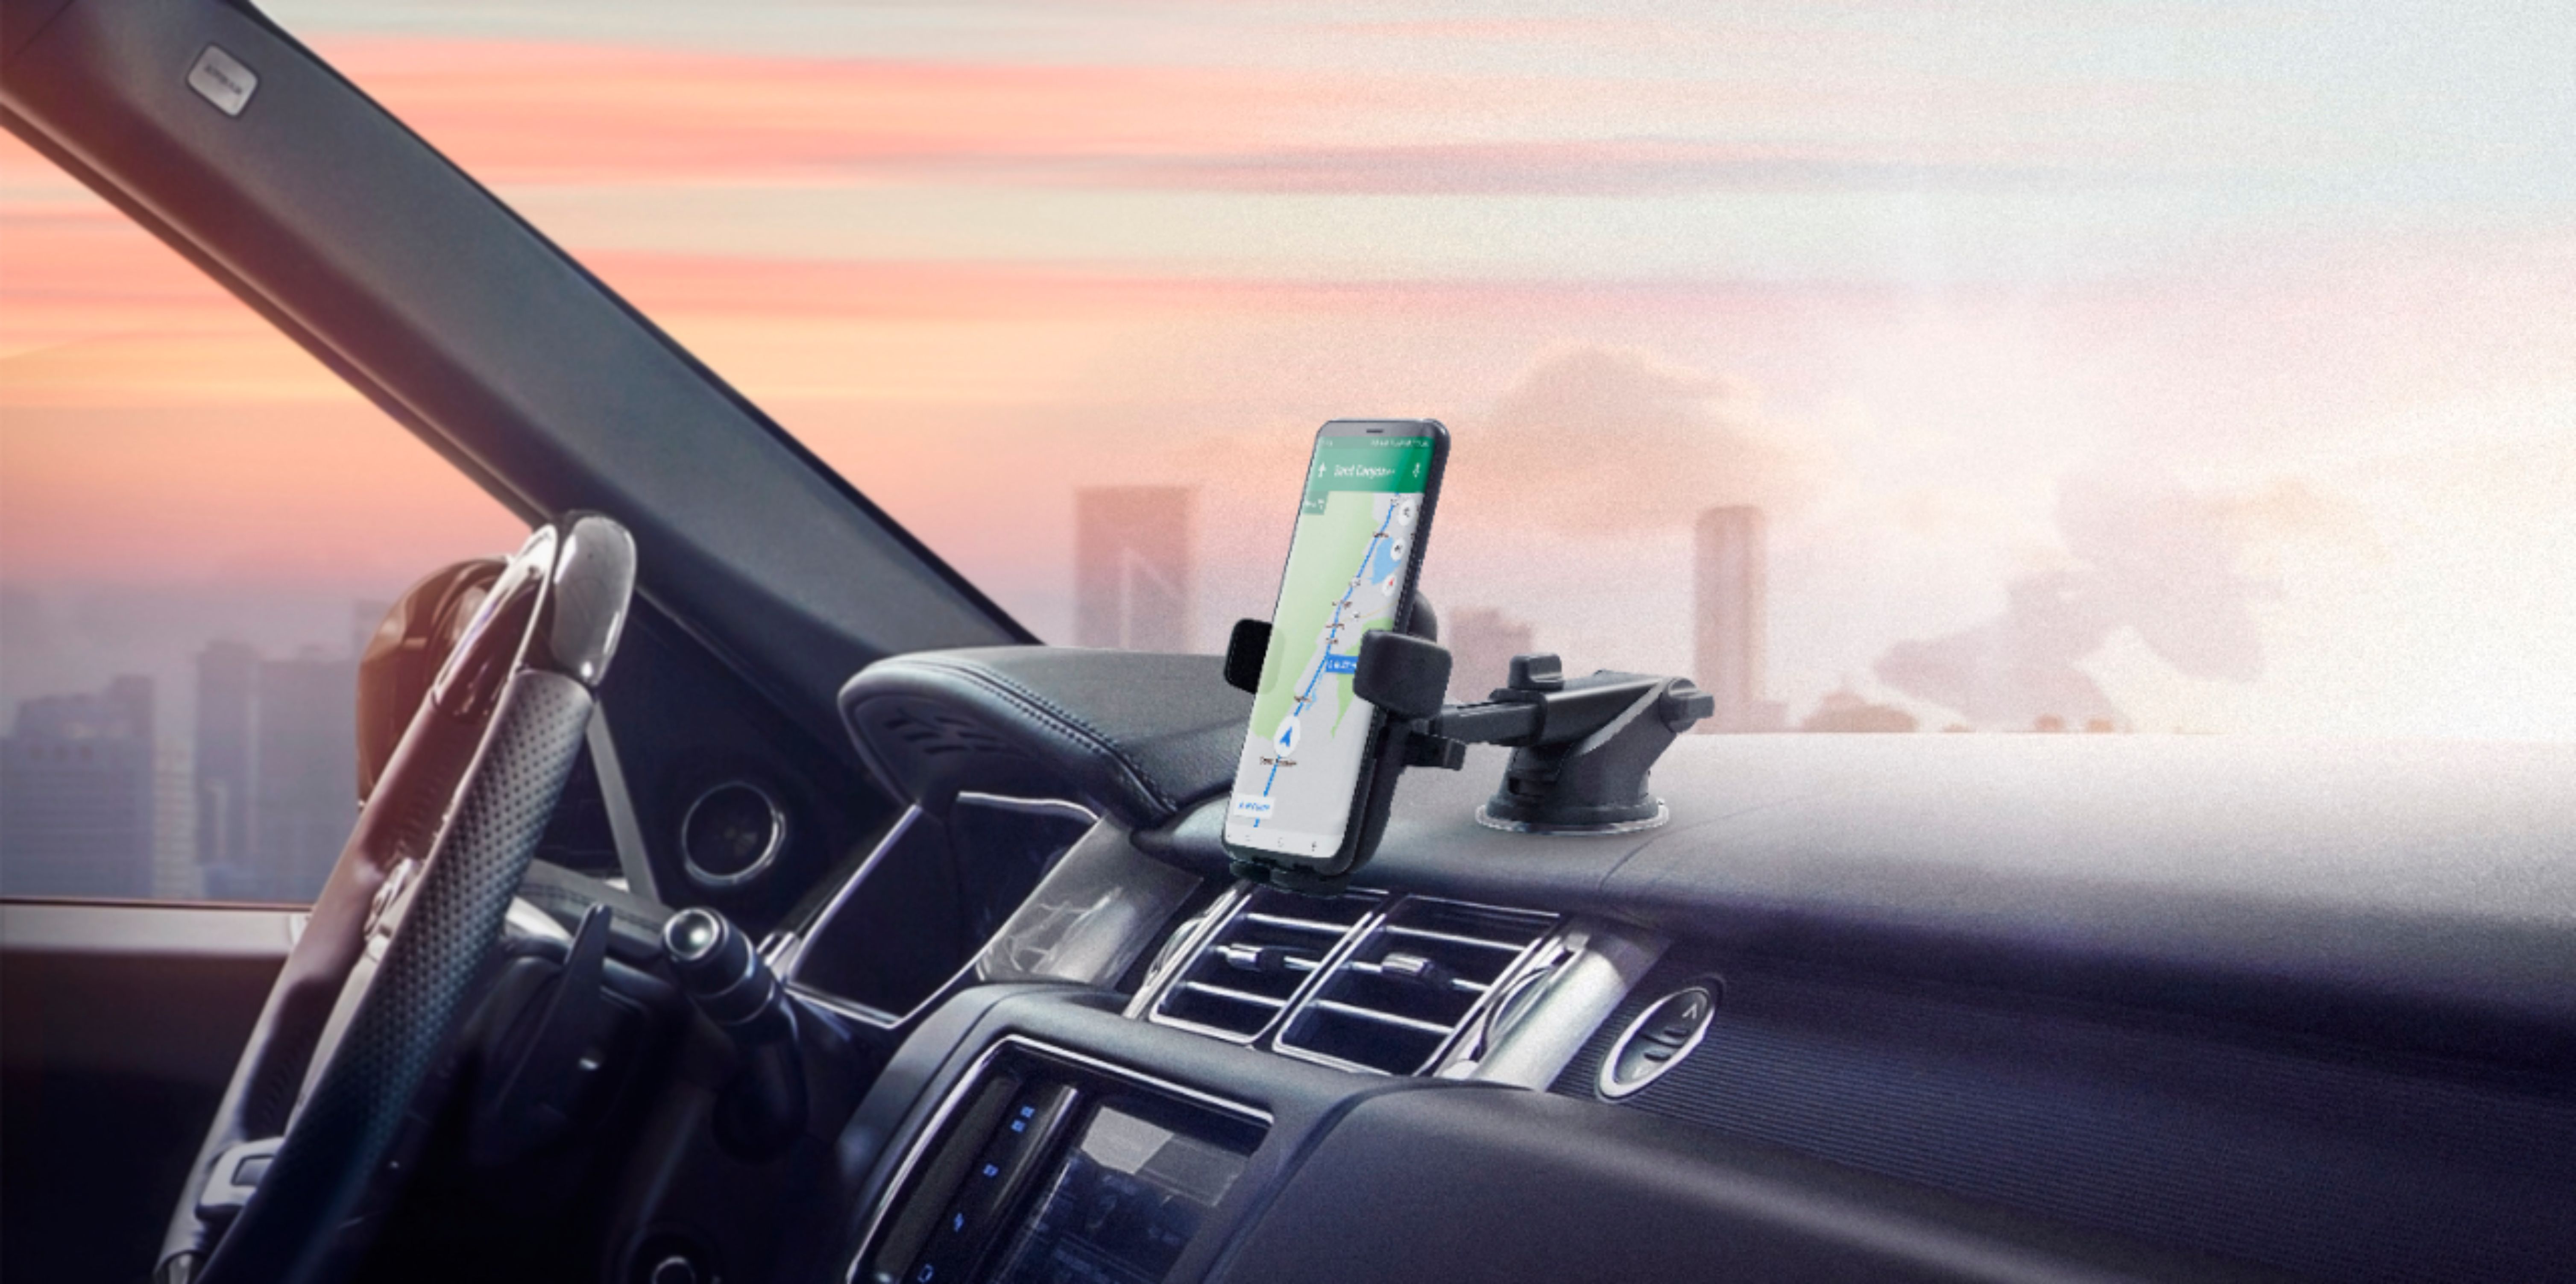 iOttie EASY ONE TOUCH WIRELESS FAST CHARGING DASHBOARD AND WINDSHIELD MOUNT  